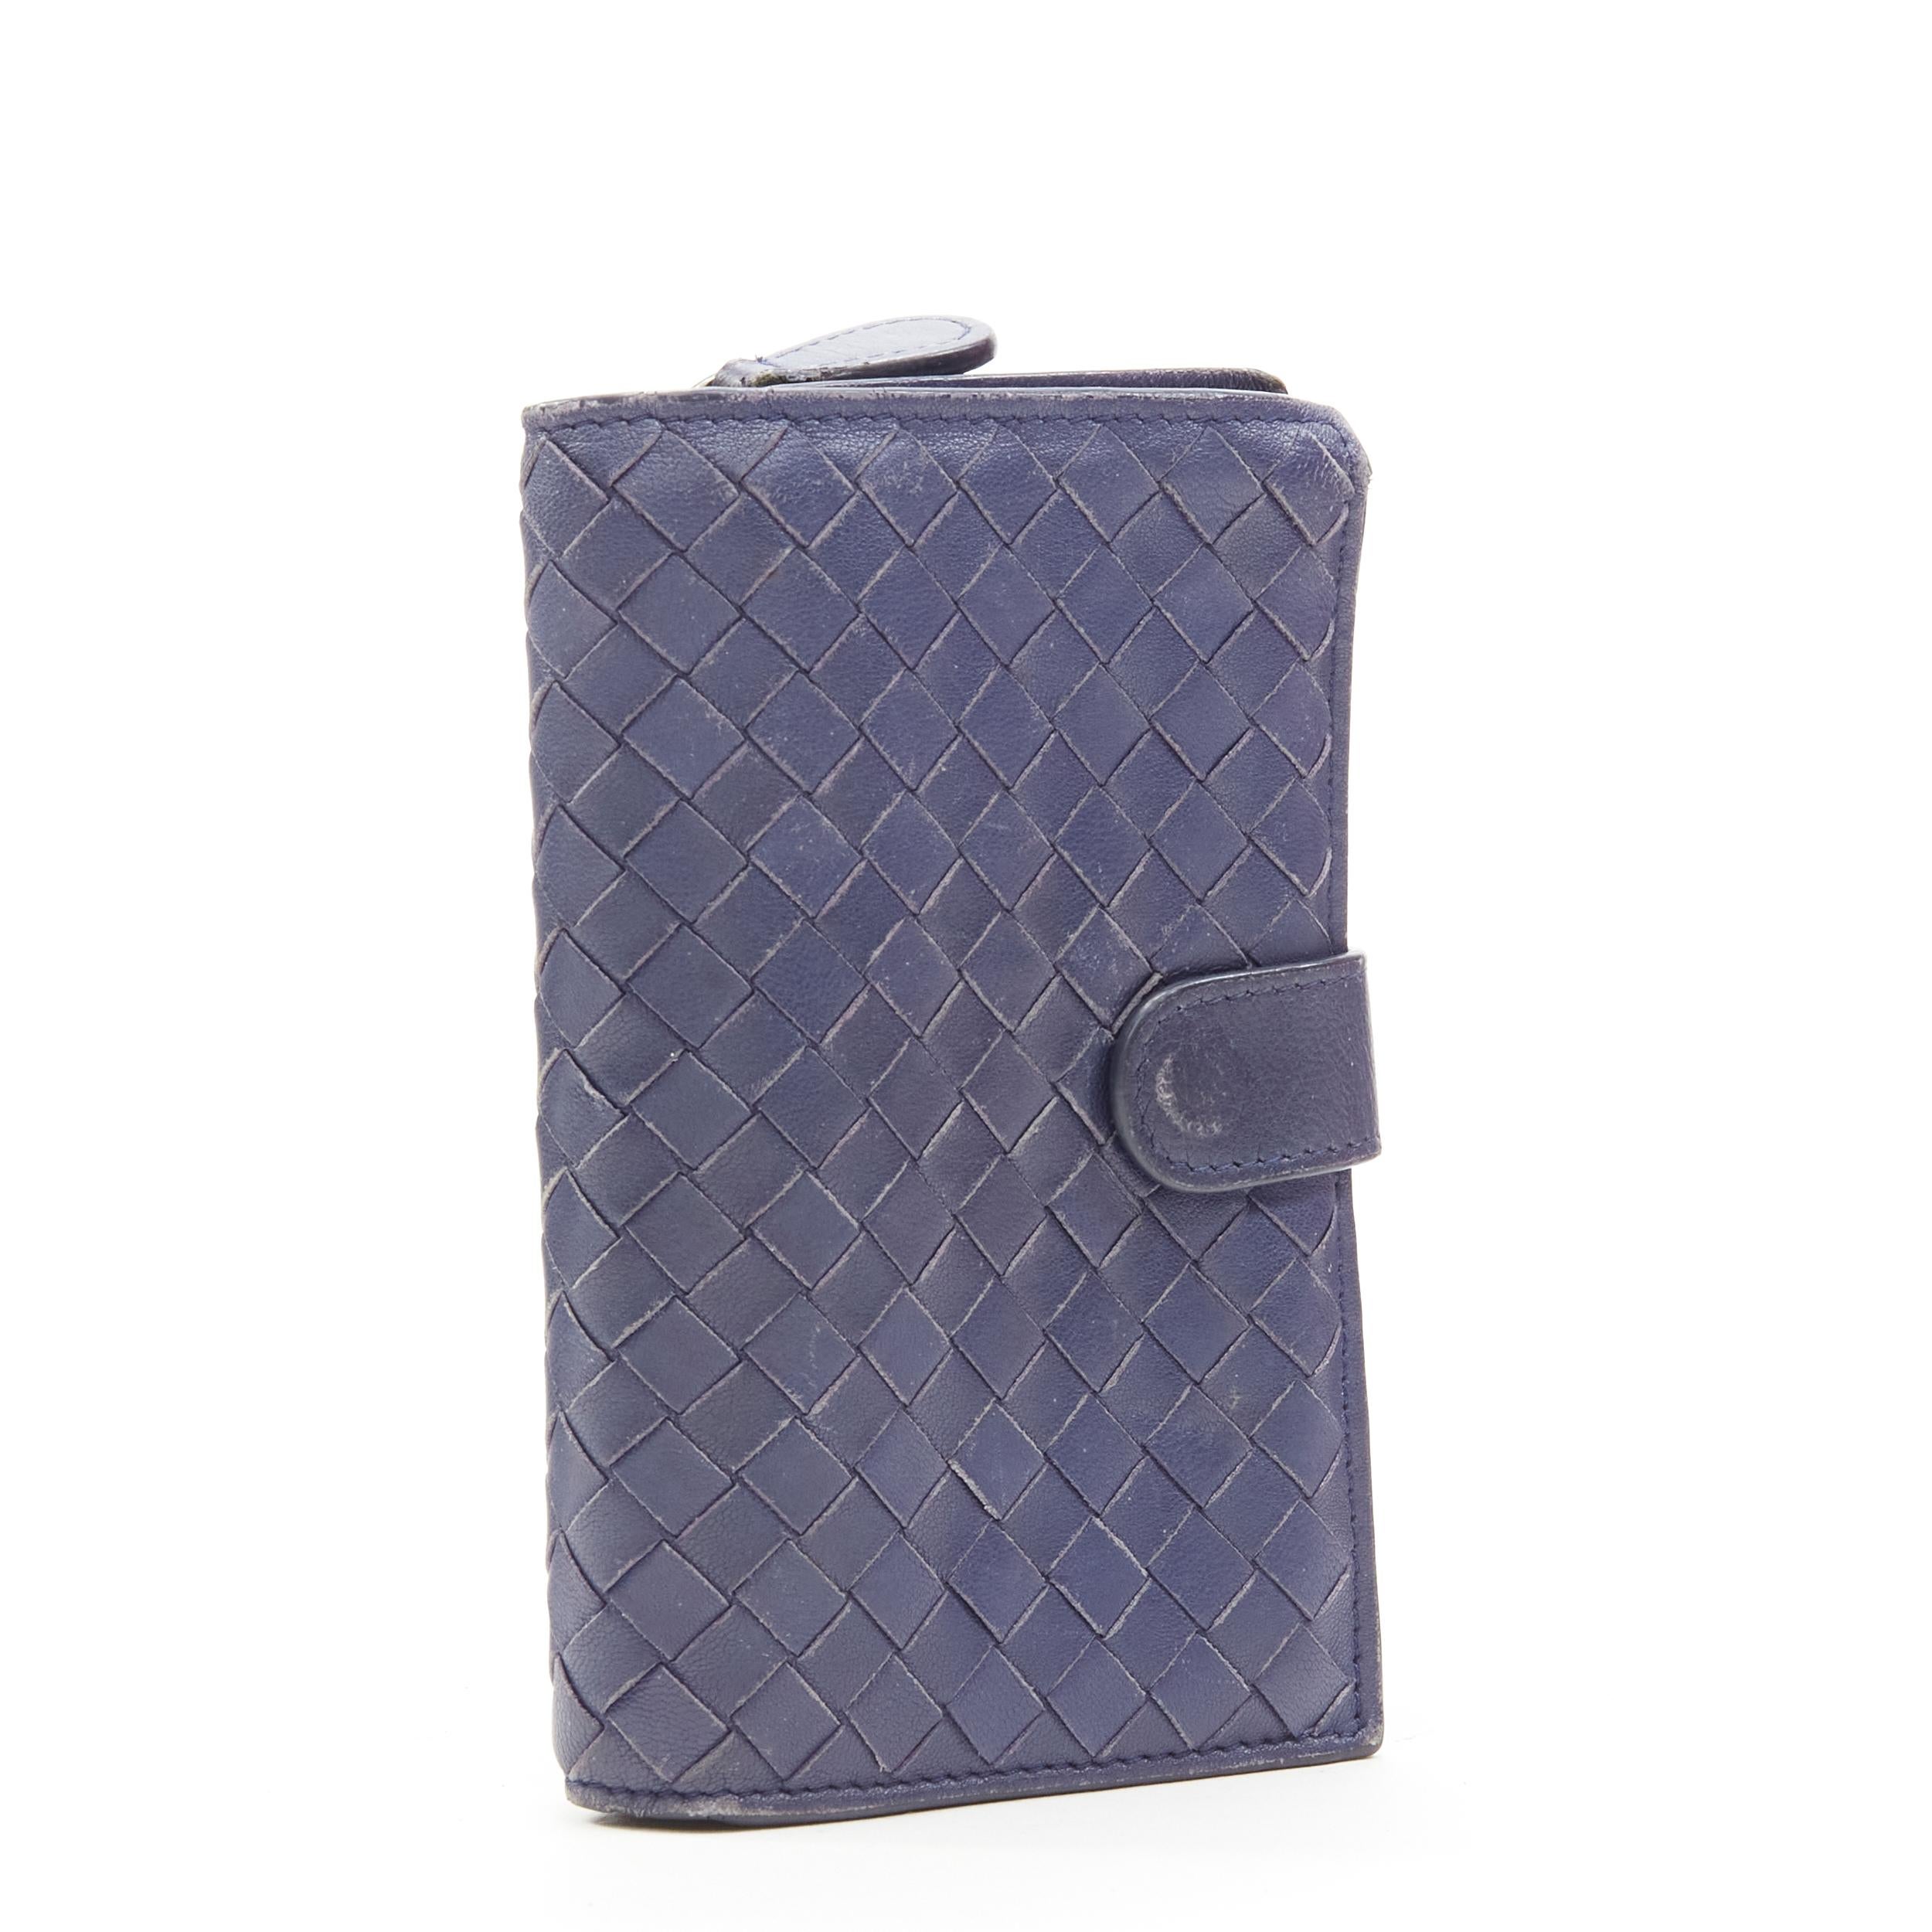 BOTTEGA VENETA Intrecciato Weave navy blue leather zip coins 10-slot wallet 
Reference: JACG/A00013 
Brand: Bottega Veneta 
Material: Leather 
Color: Navy 
Pattern: Solid 
Closure: Zip 
Extra Detail: Button tab with zip around coins compartment.